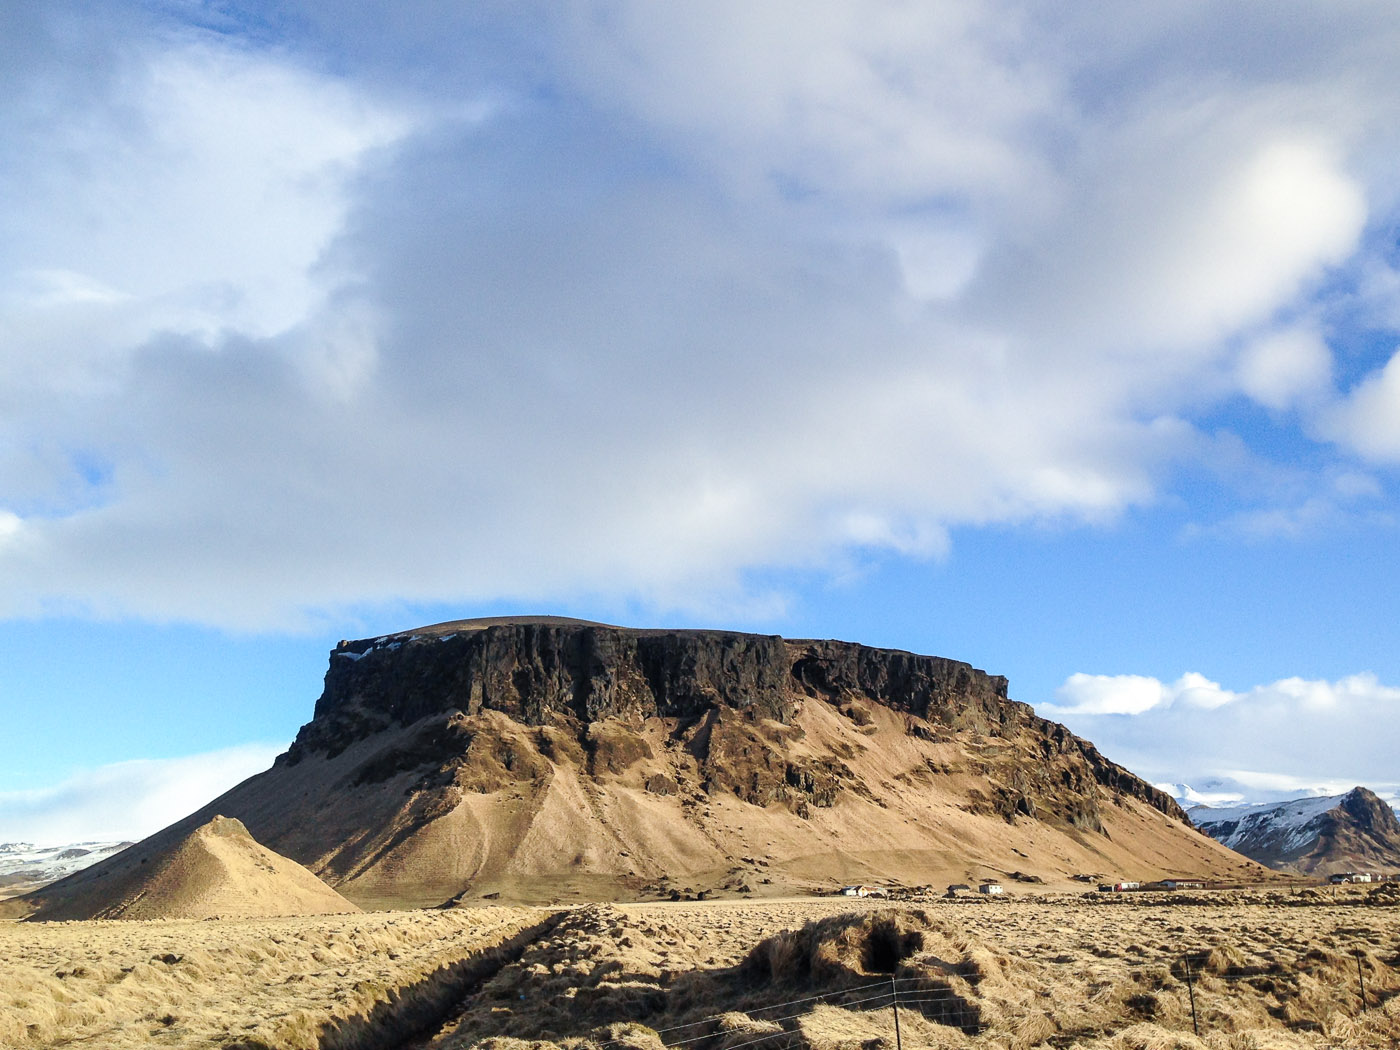 South coast. Driving back to Reykjavík! - In front of Mt. Pétursey. Out for a short hike. II. (2 March 2014)